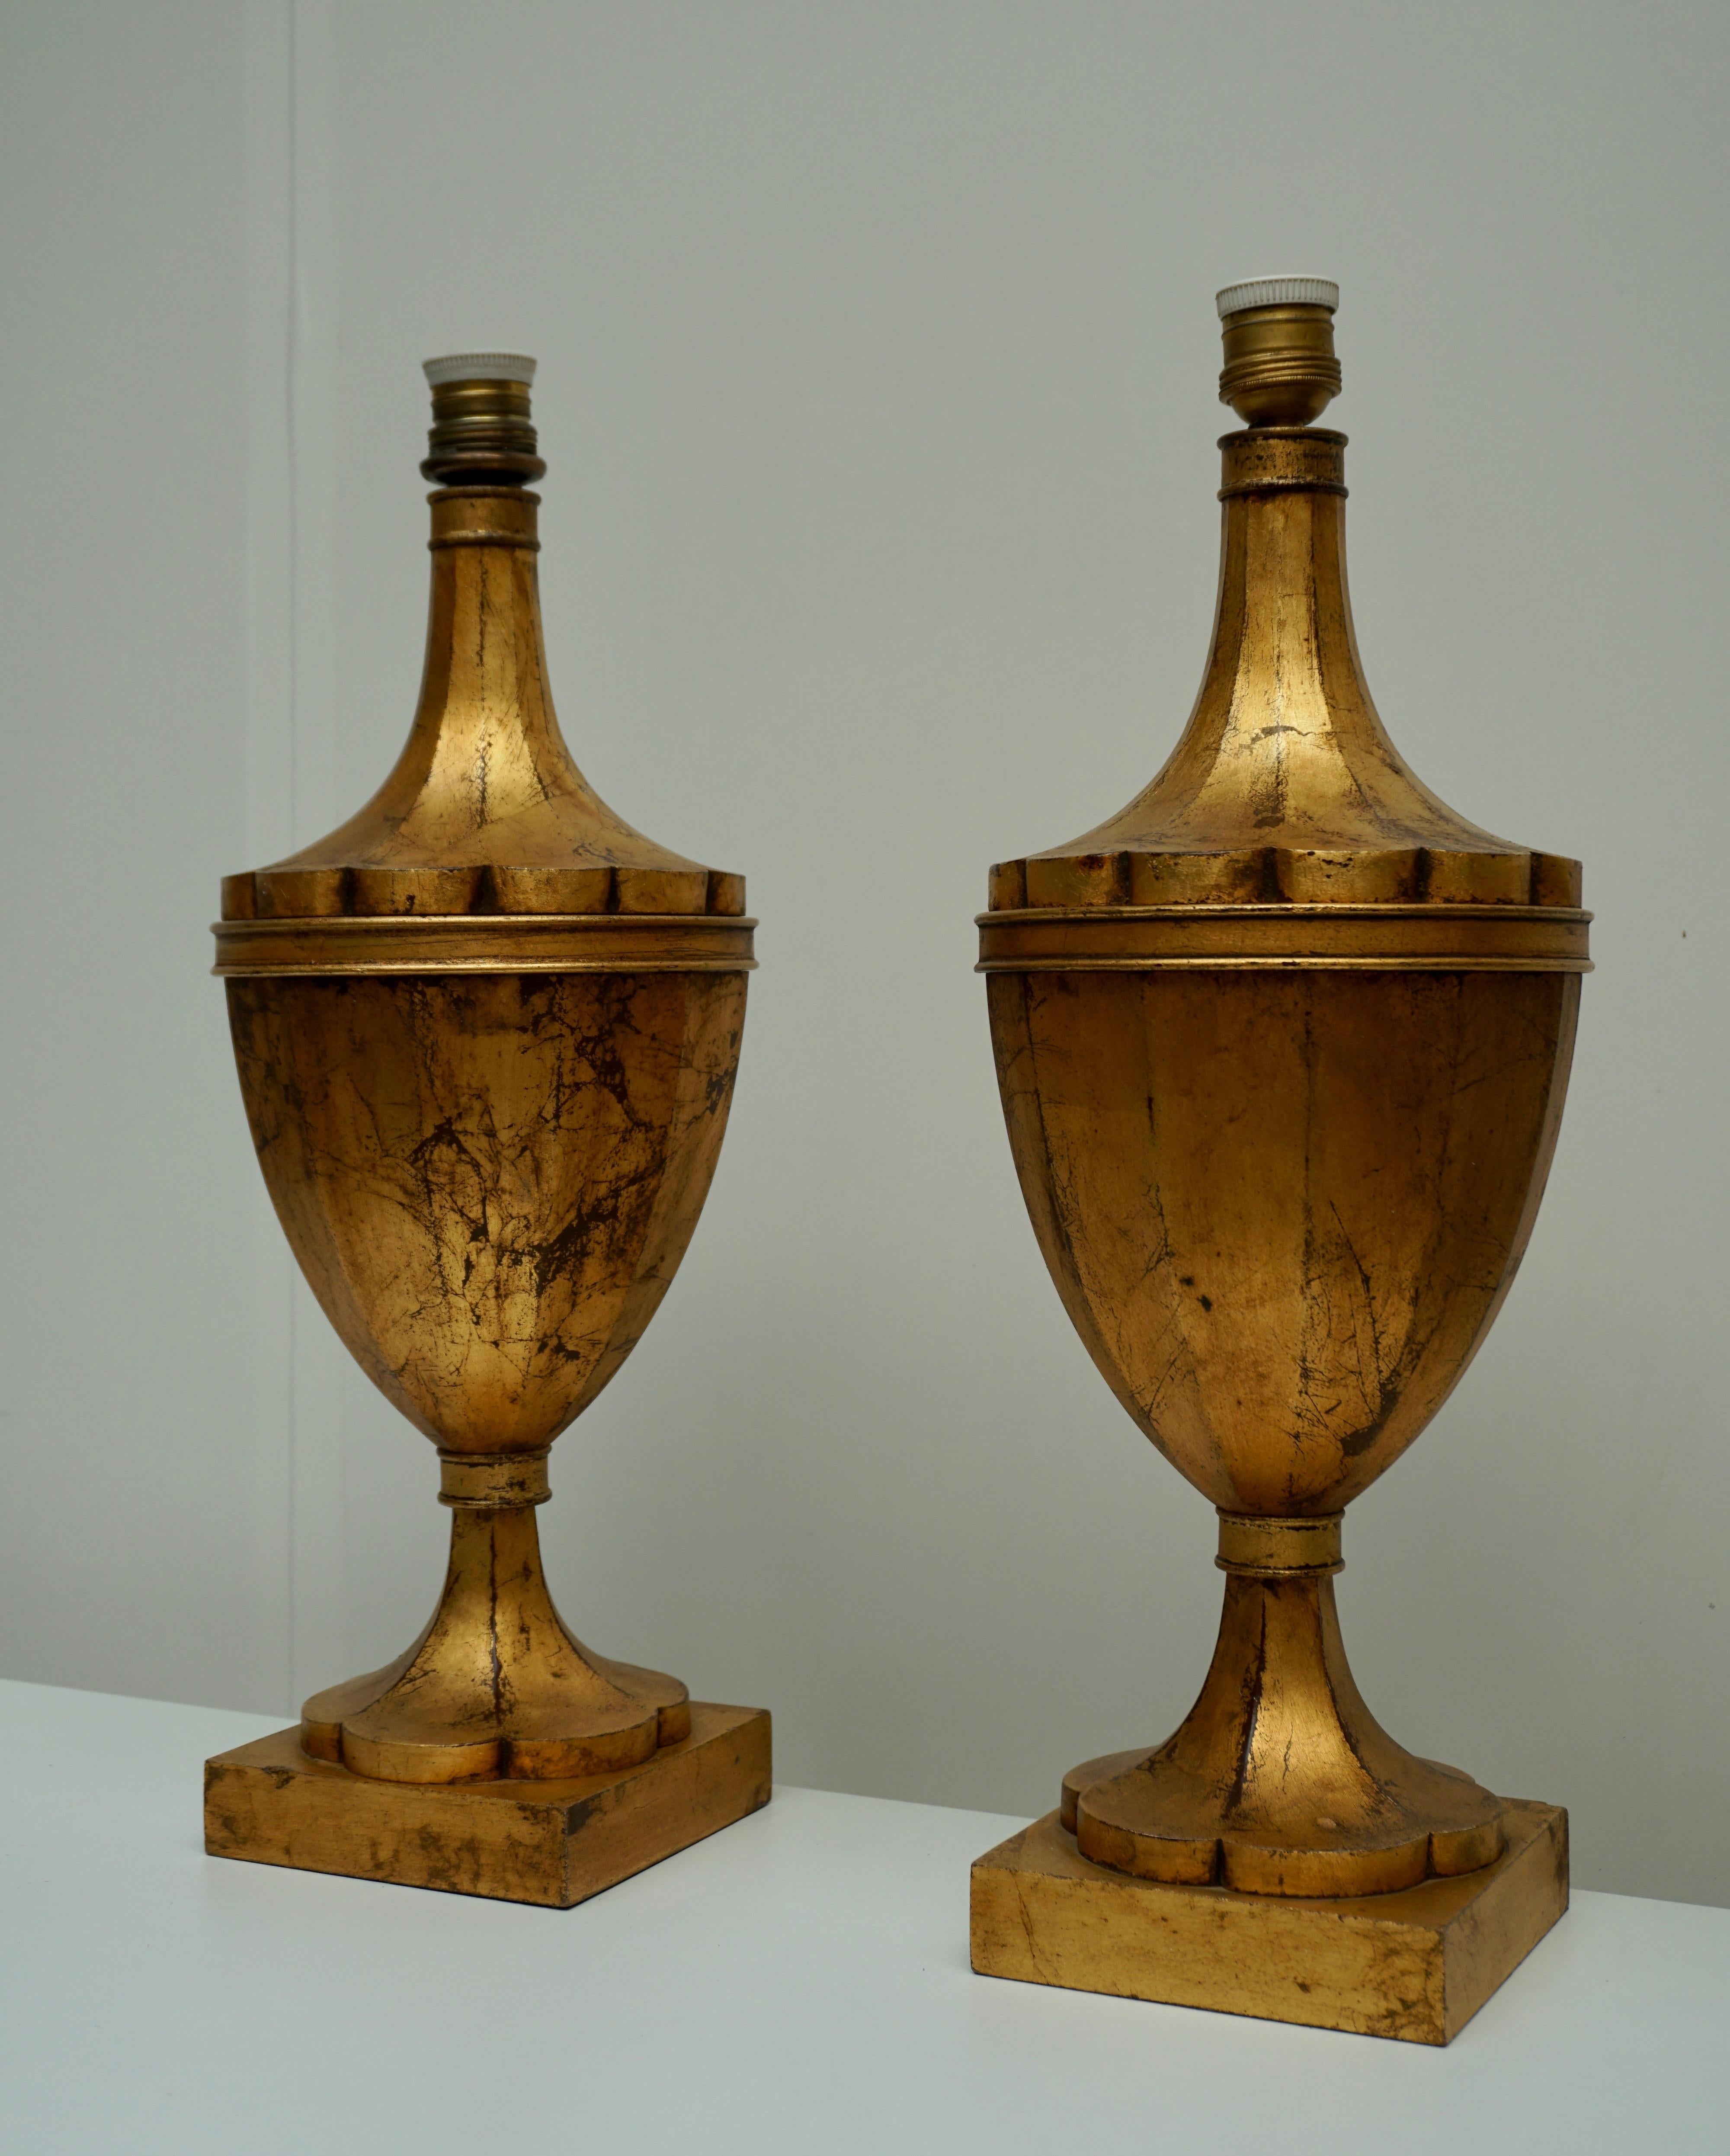 Midcentury nicely pair of carved wooden urn lamps.
Diameter 18 cm.
Height including the fitting 50 cm.